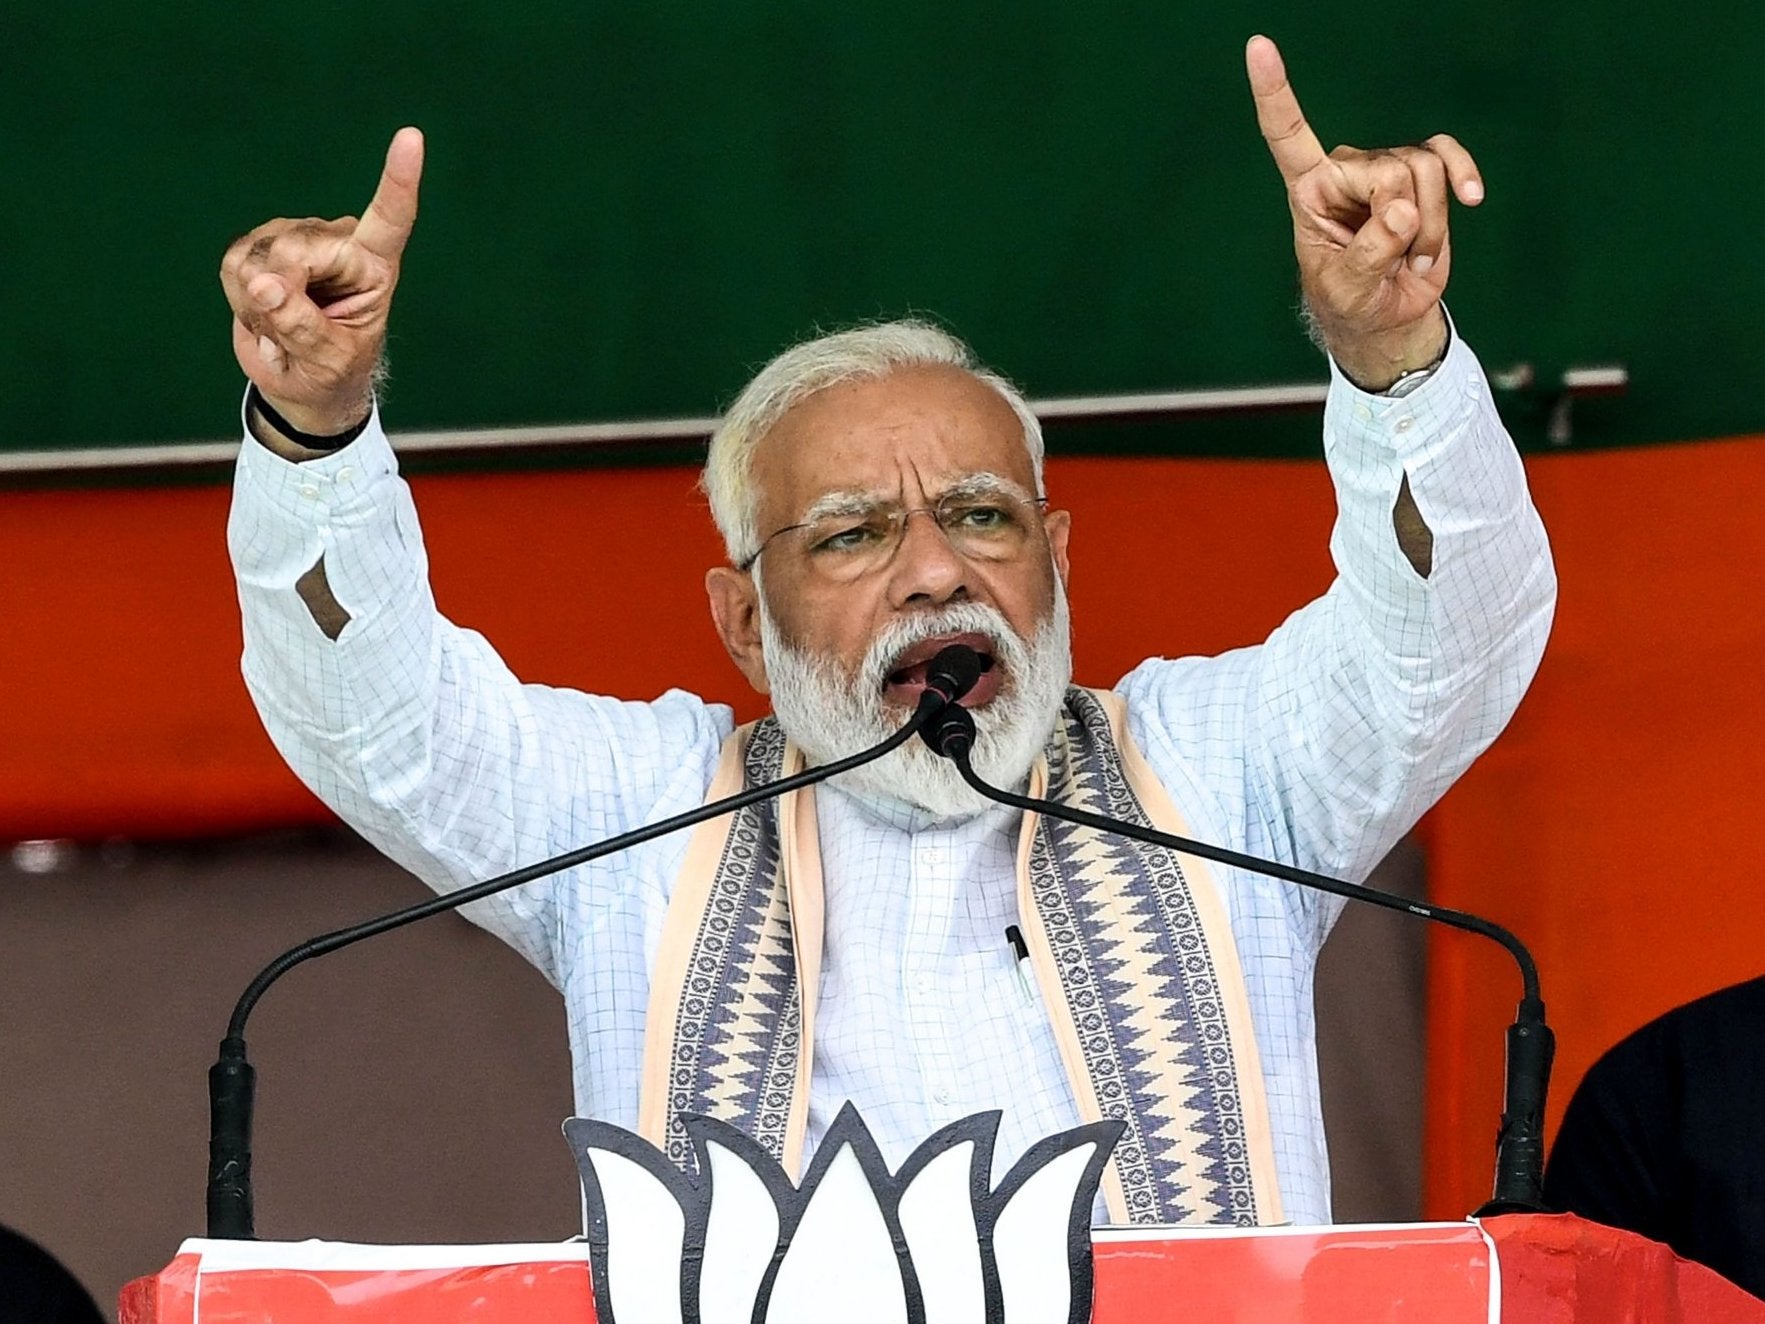 Indian Prime Minister Narendra Modi gestures as he speaks to political supporters during an election rally in Muzaffarpur in the eastern state of Bihar